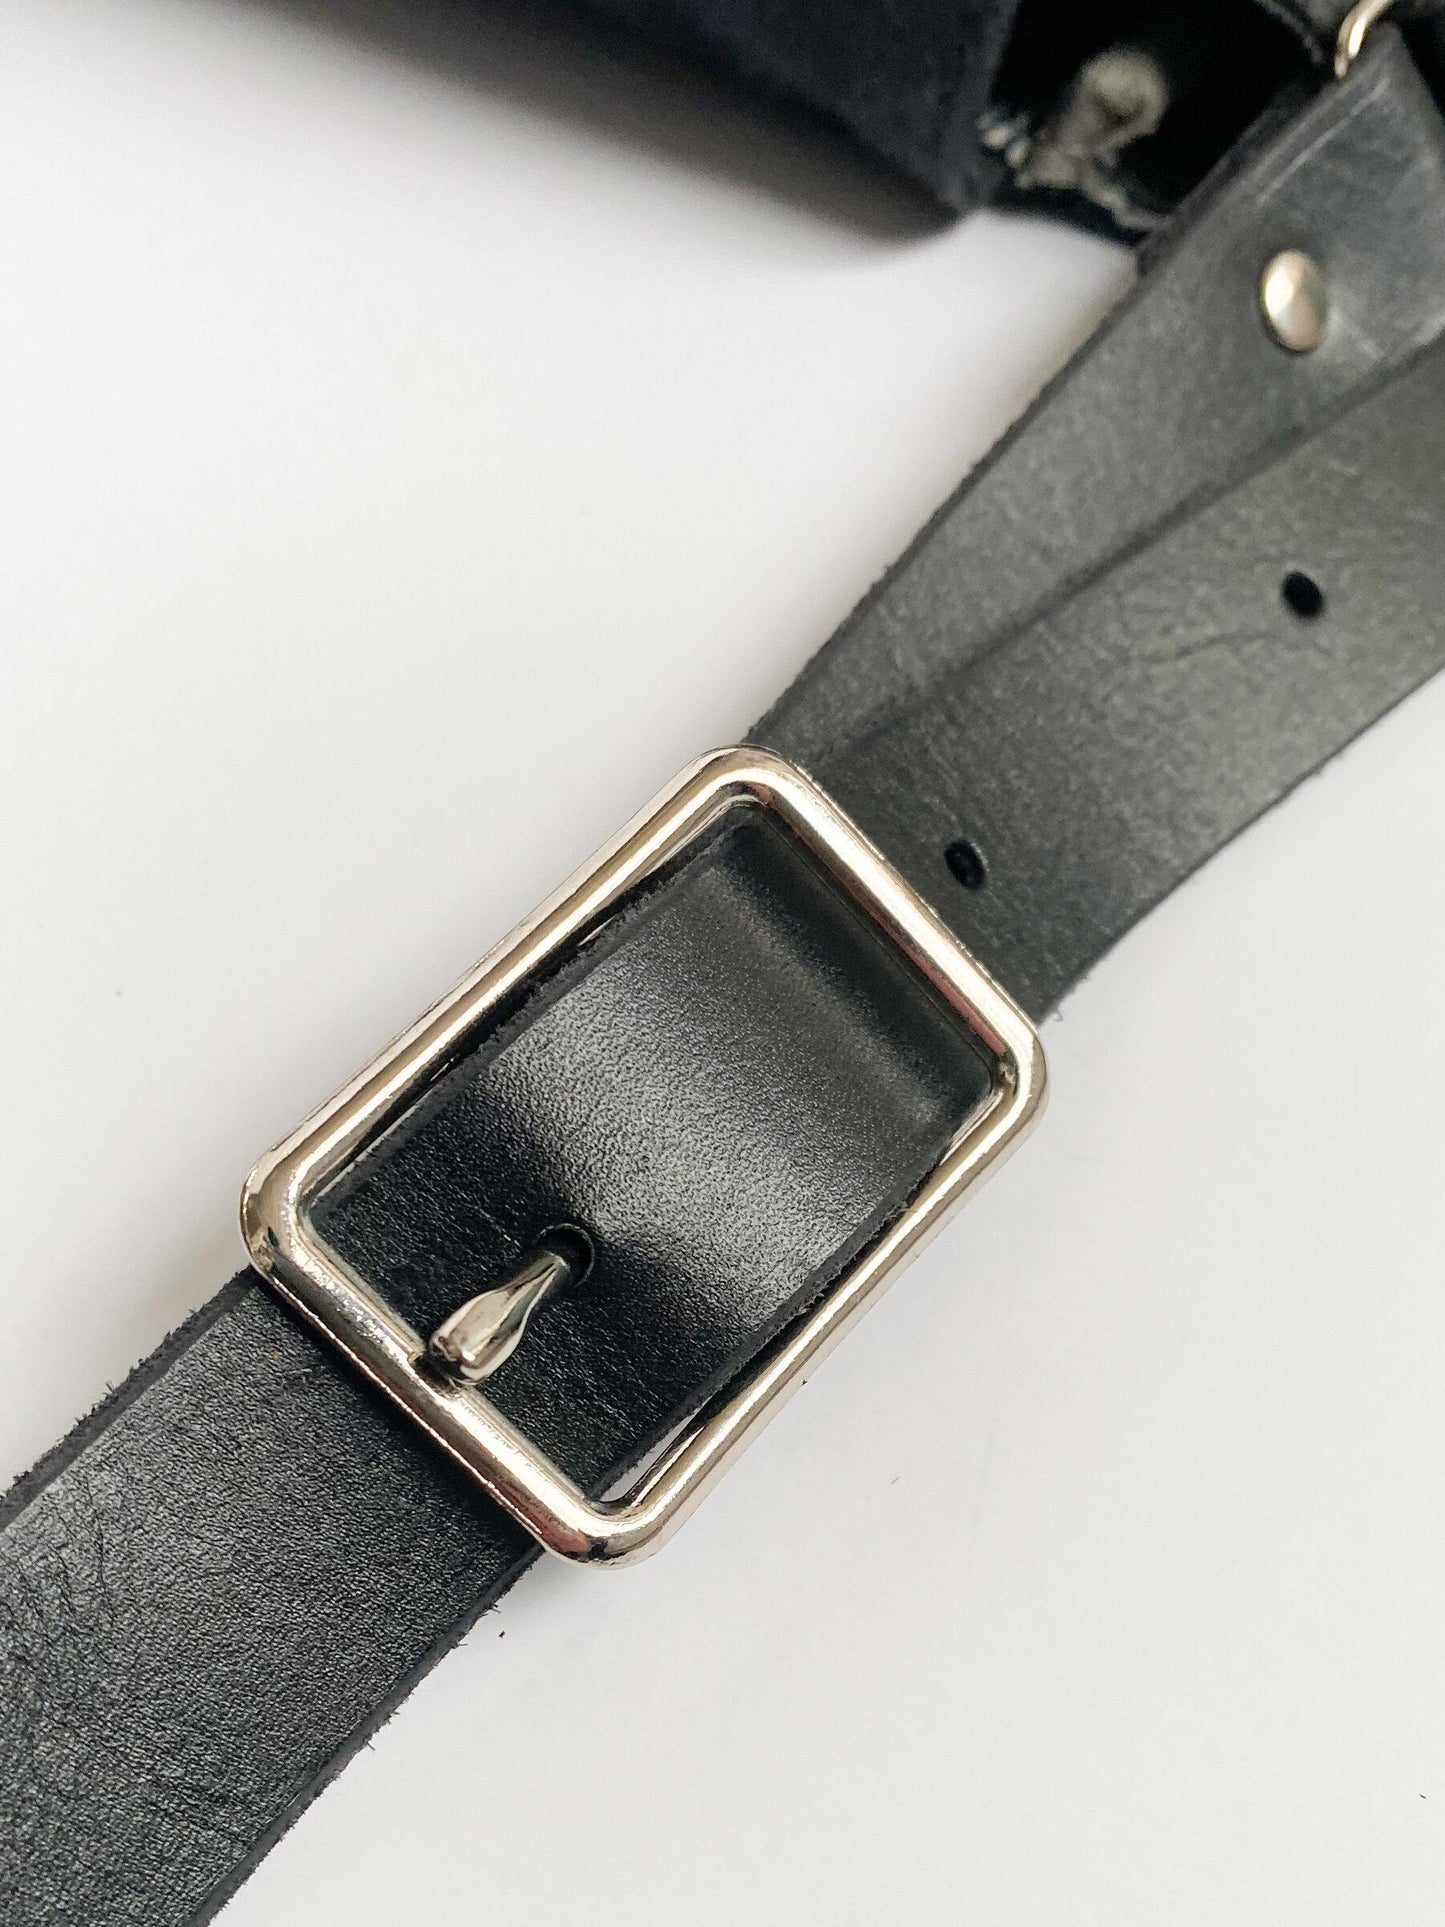 Black leather strap and nickel buckle detail. 